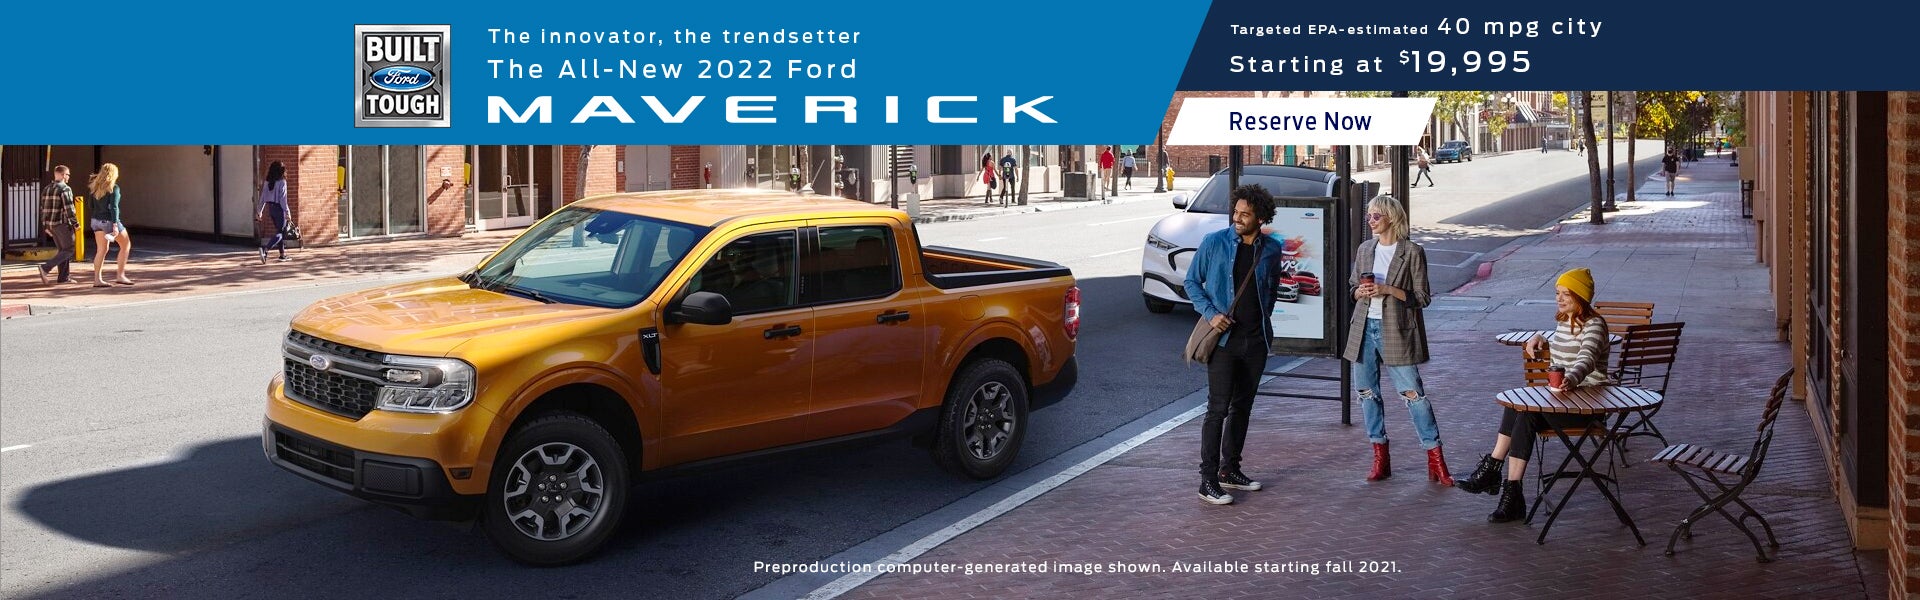 Reserve The All-New 2022 Ford Maverick